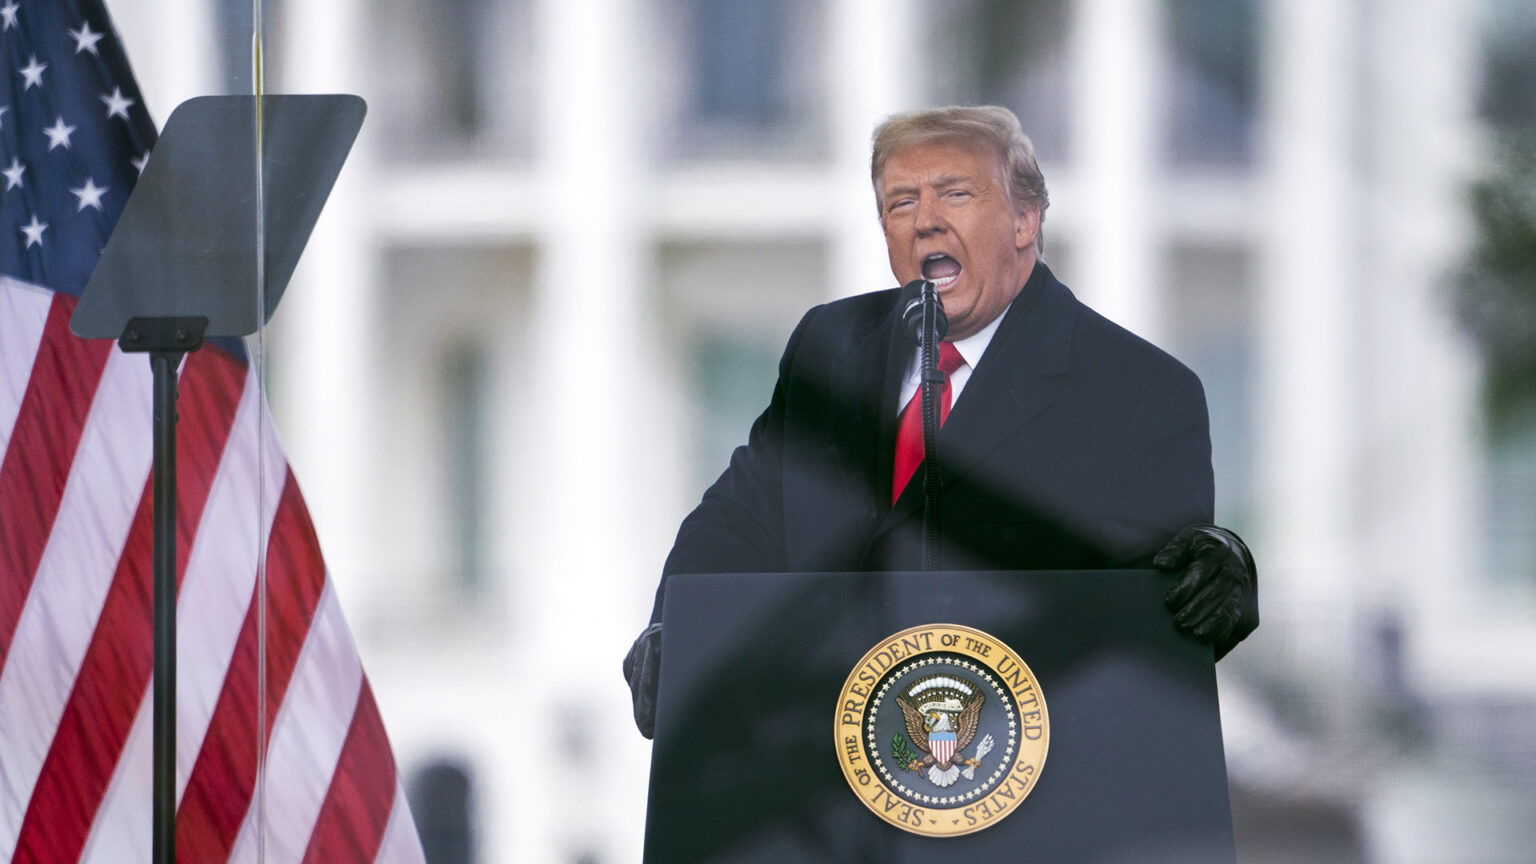 Donald Trump stands and speaks into a microphone mounted to a podium affixed with the Seal of the President of the United States while facing a teleprompter, with a U.S. flag and an out-of-focus White House in the background.